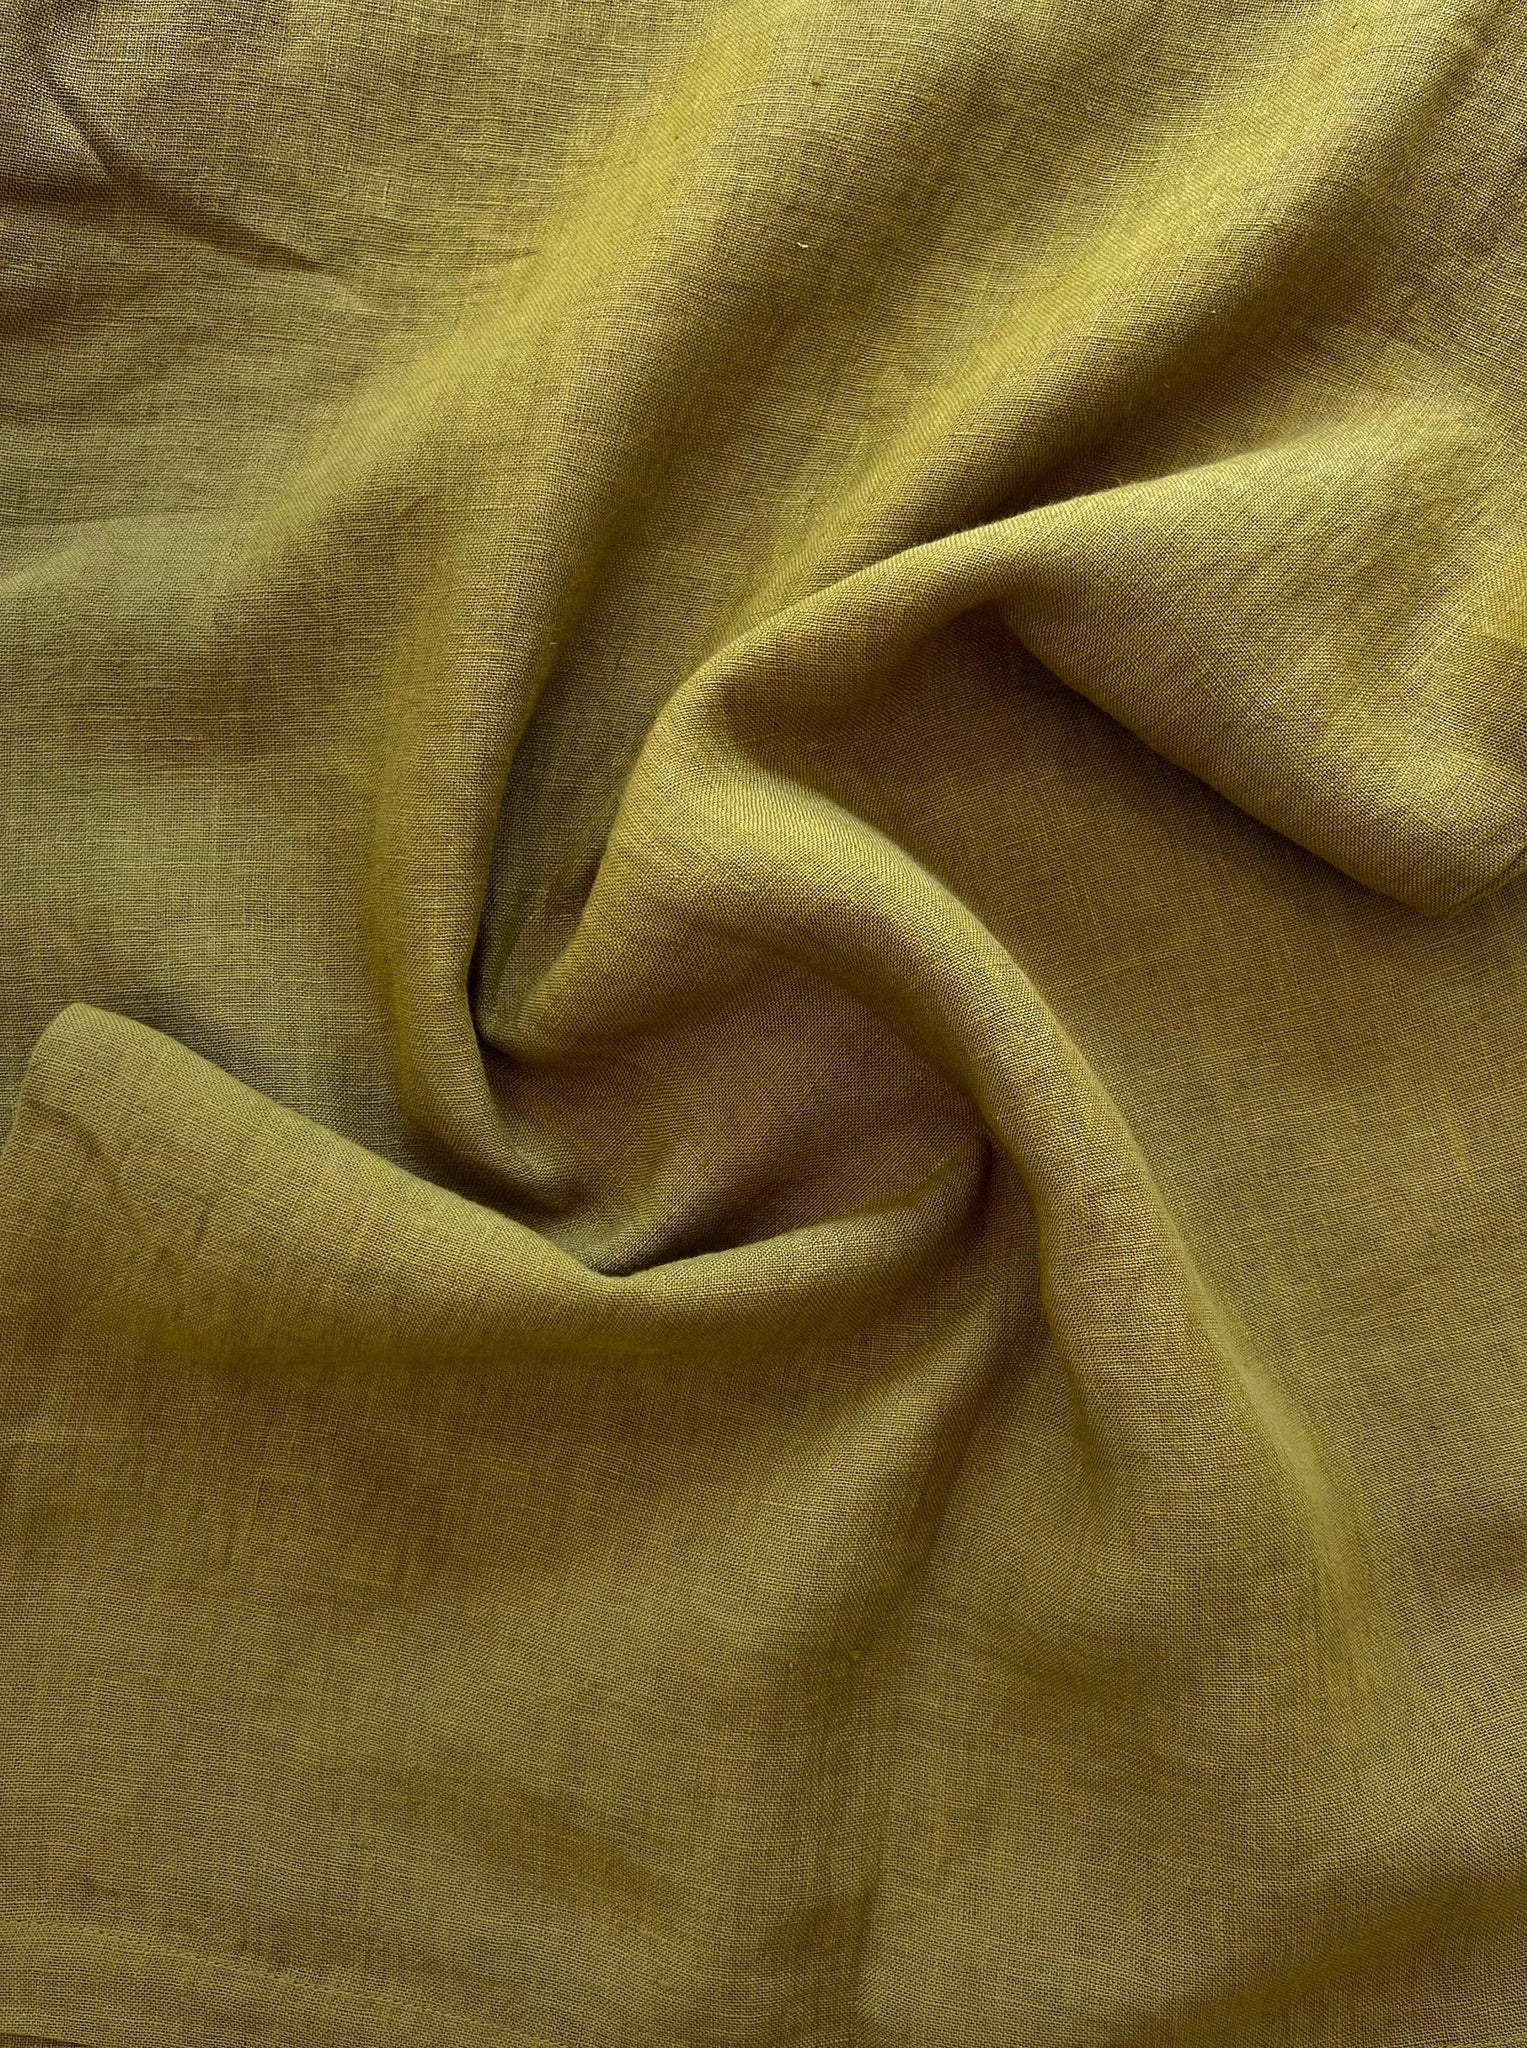 A close up image of Everyday Crop - Dried Tobacco linen fabric.